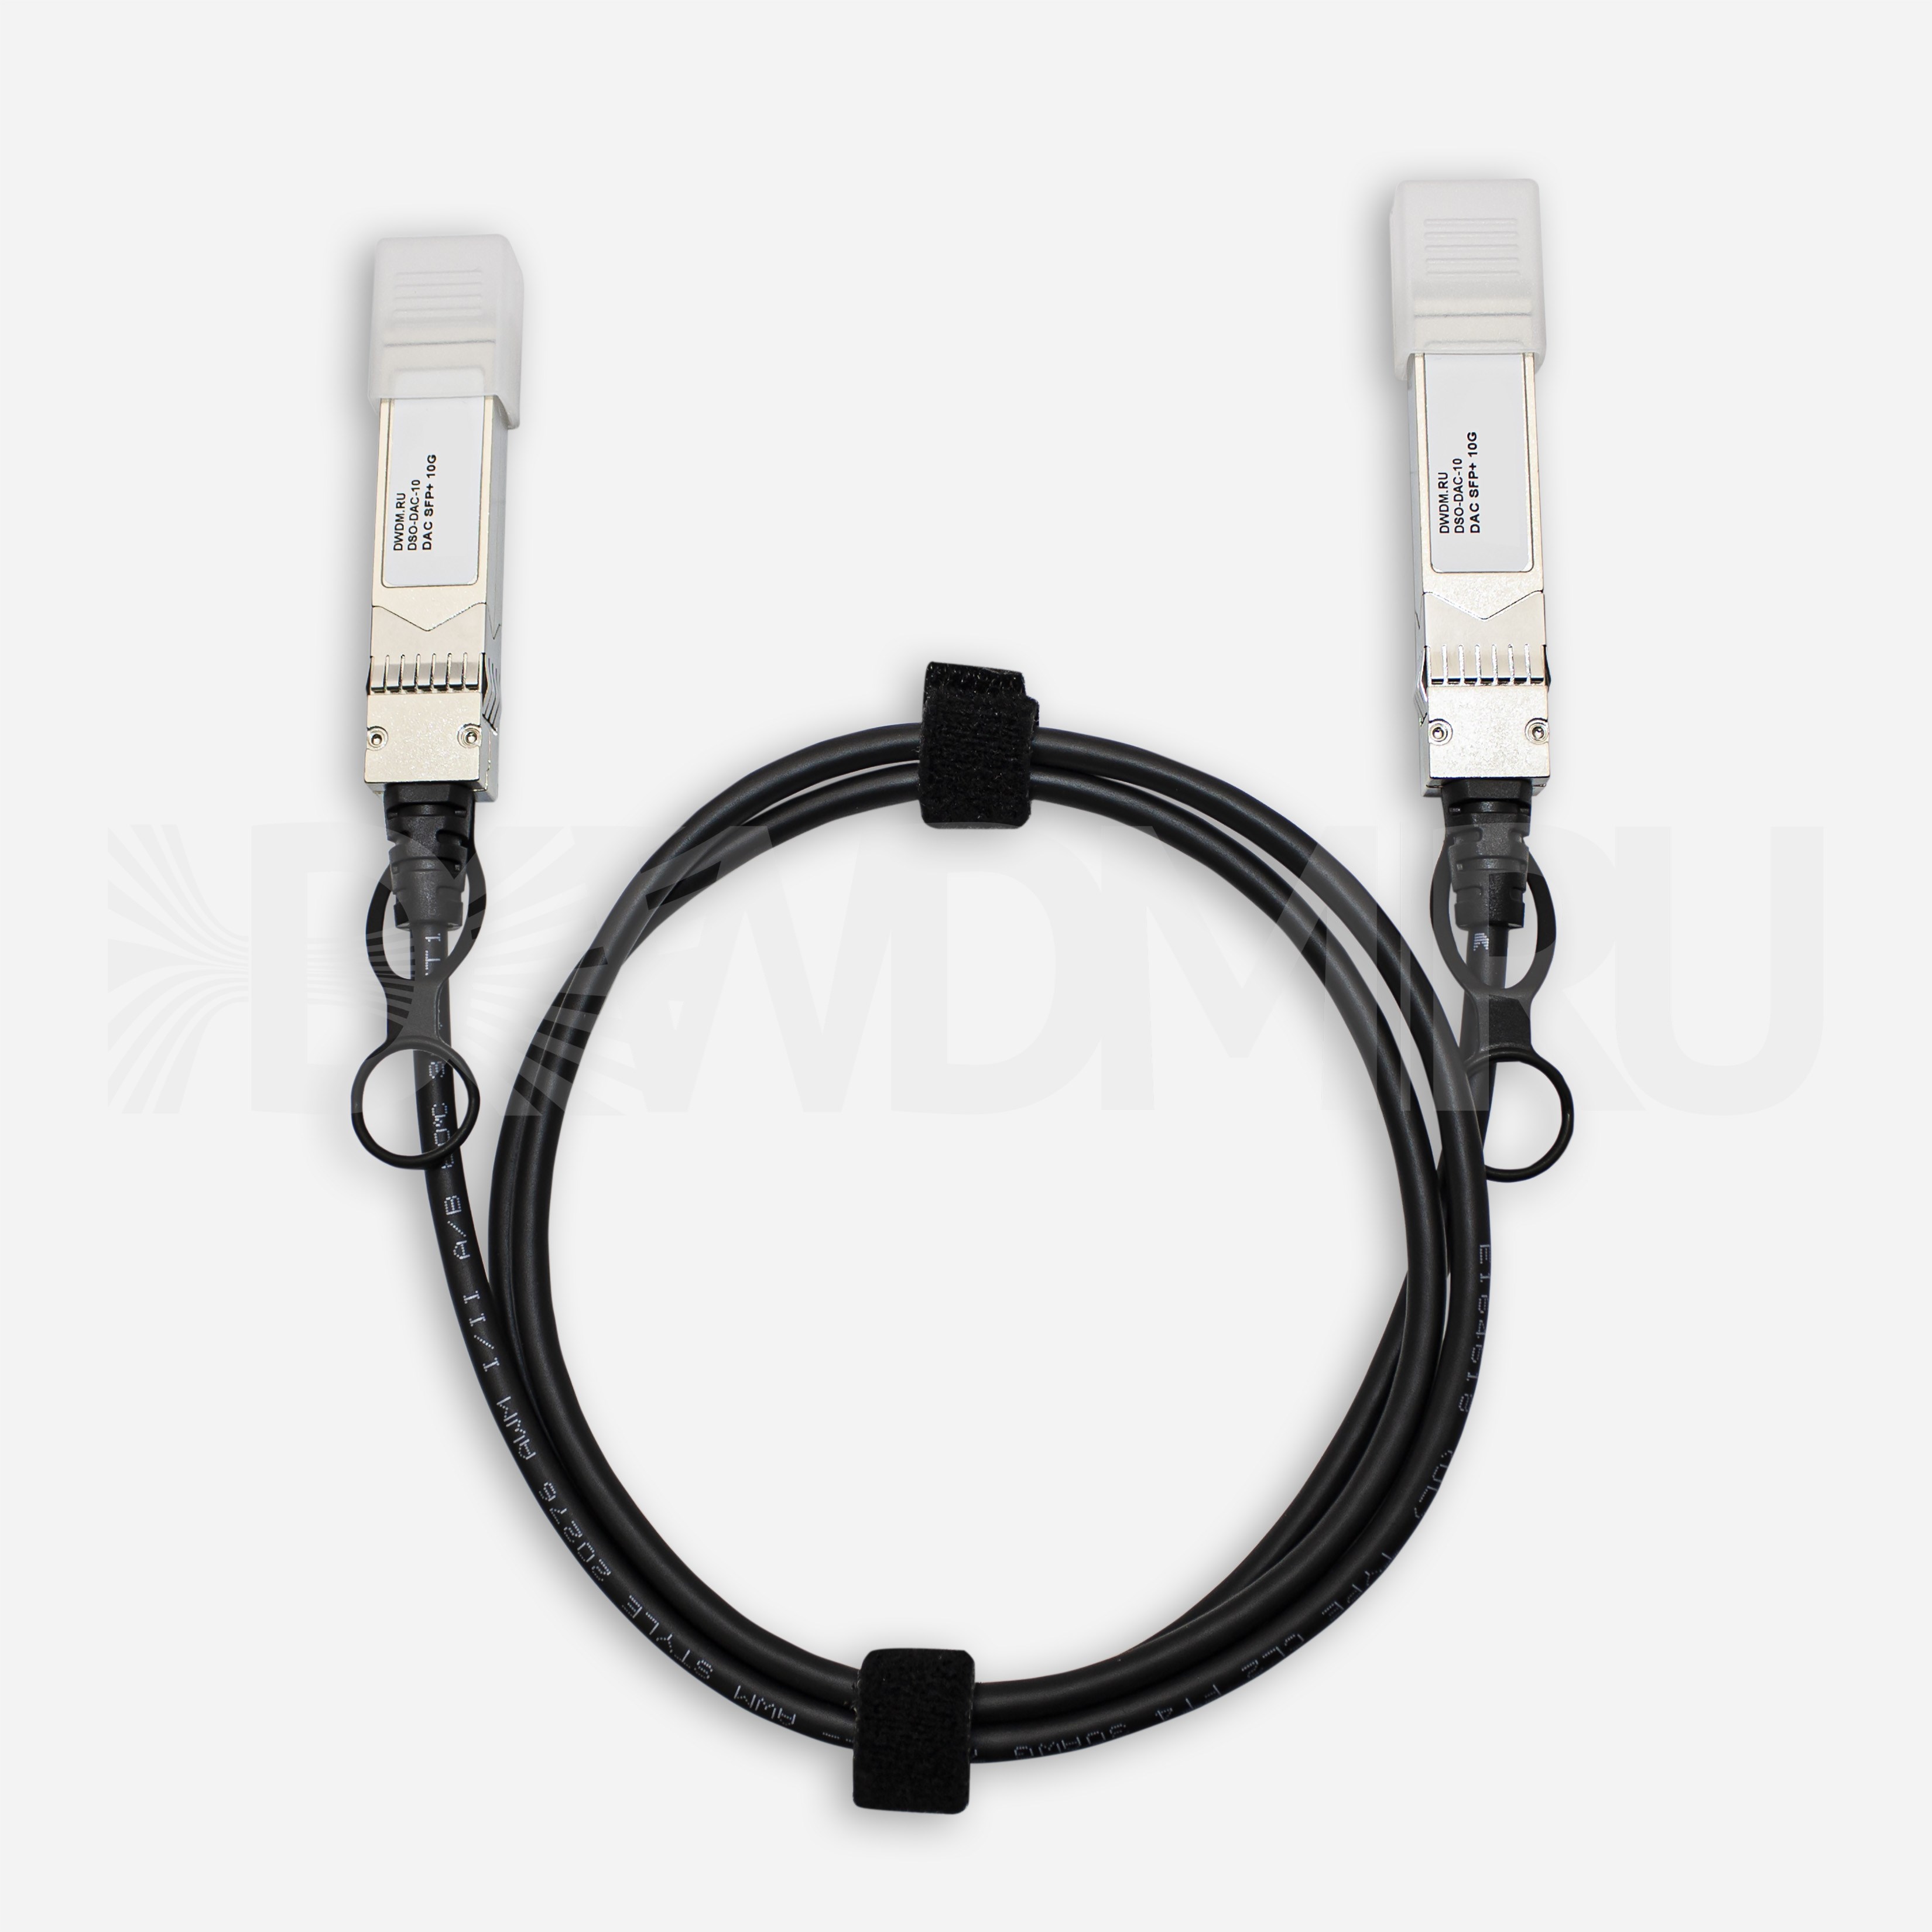 Кабель Direct Attached, SFP+, 30AWG, 10 Гб/с, 2 м - ДВДМ.РУ (DSO-DAC-10-2)